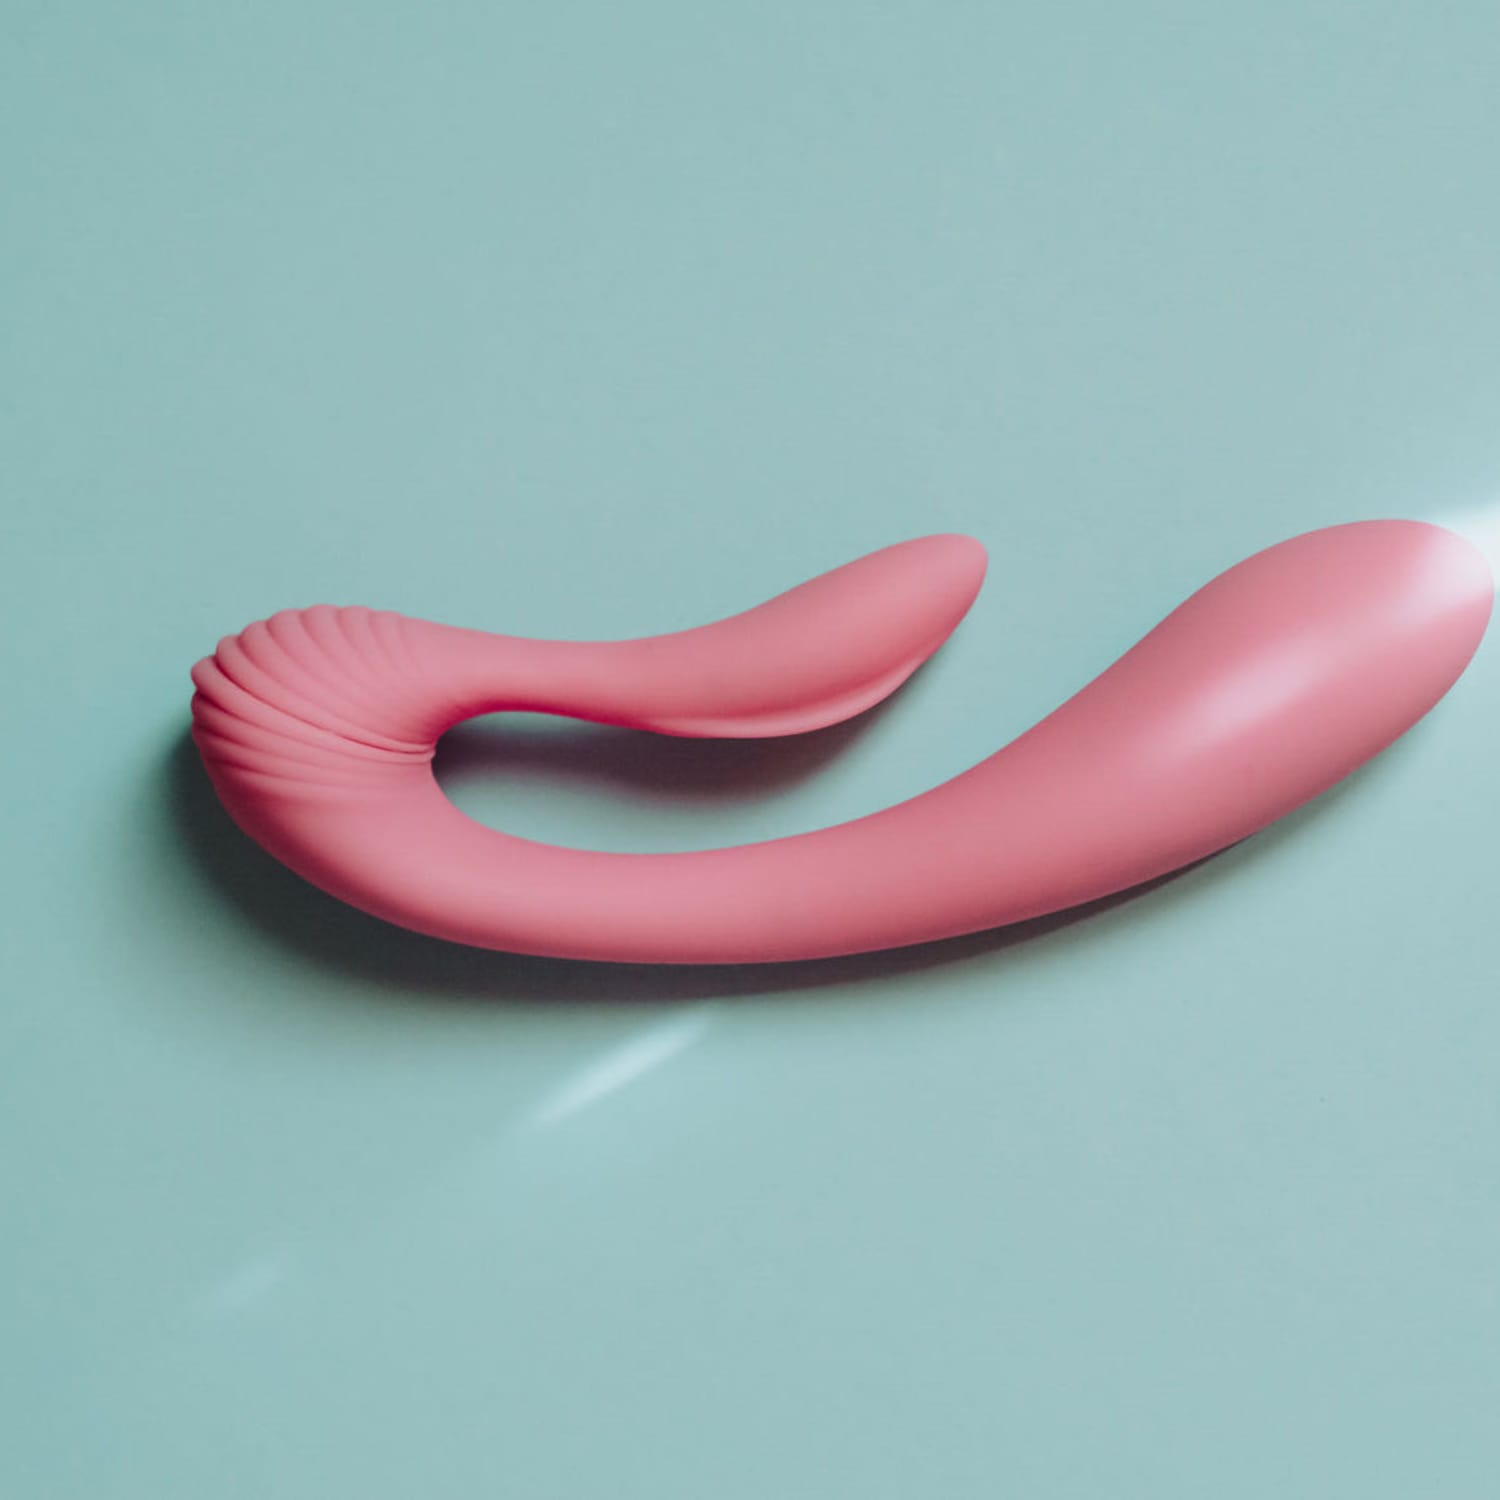 How to Wash Dildos and Sex Toys, According to Experts Apartment Therapy